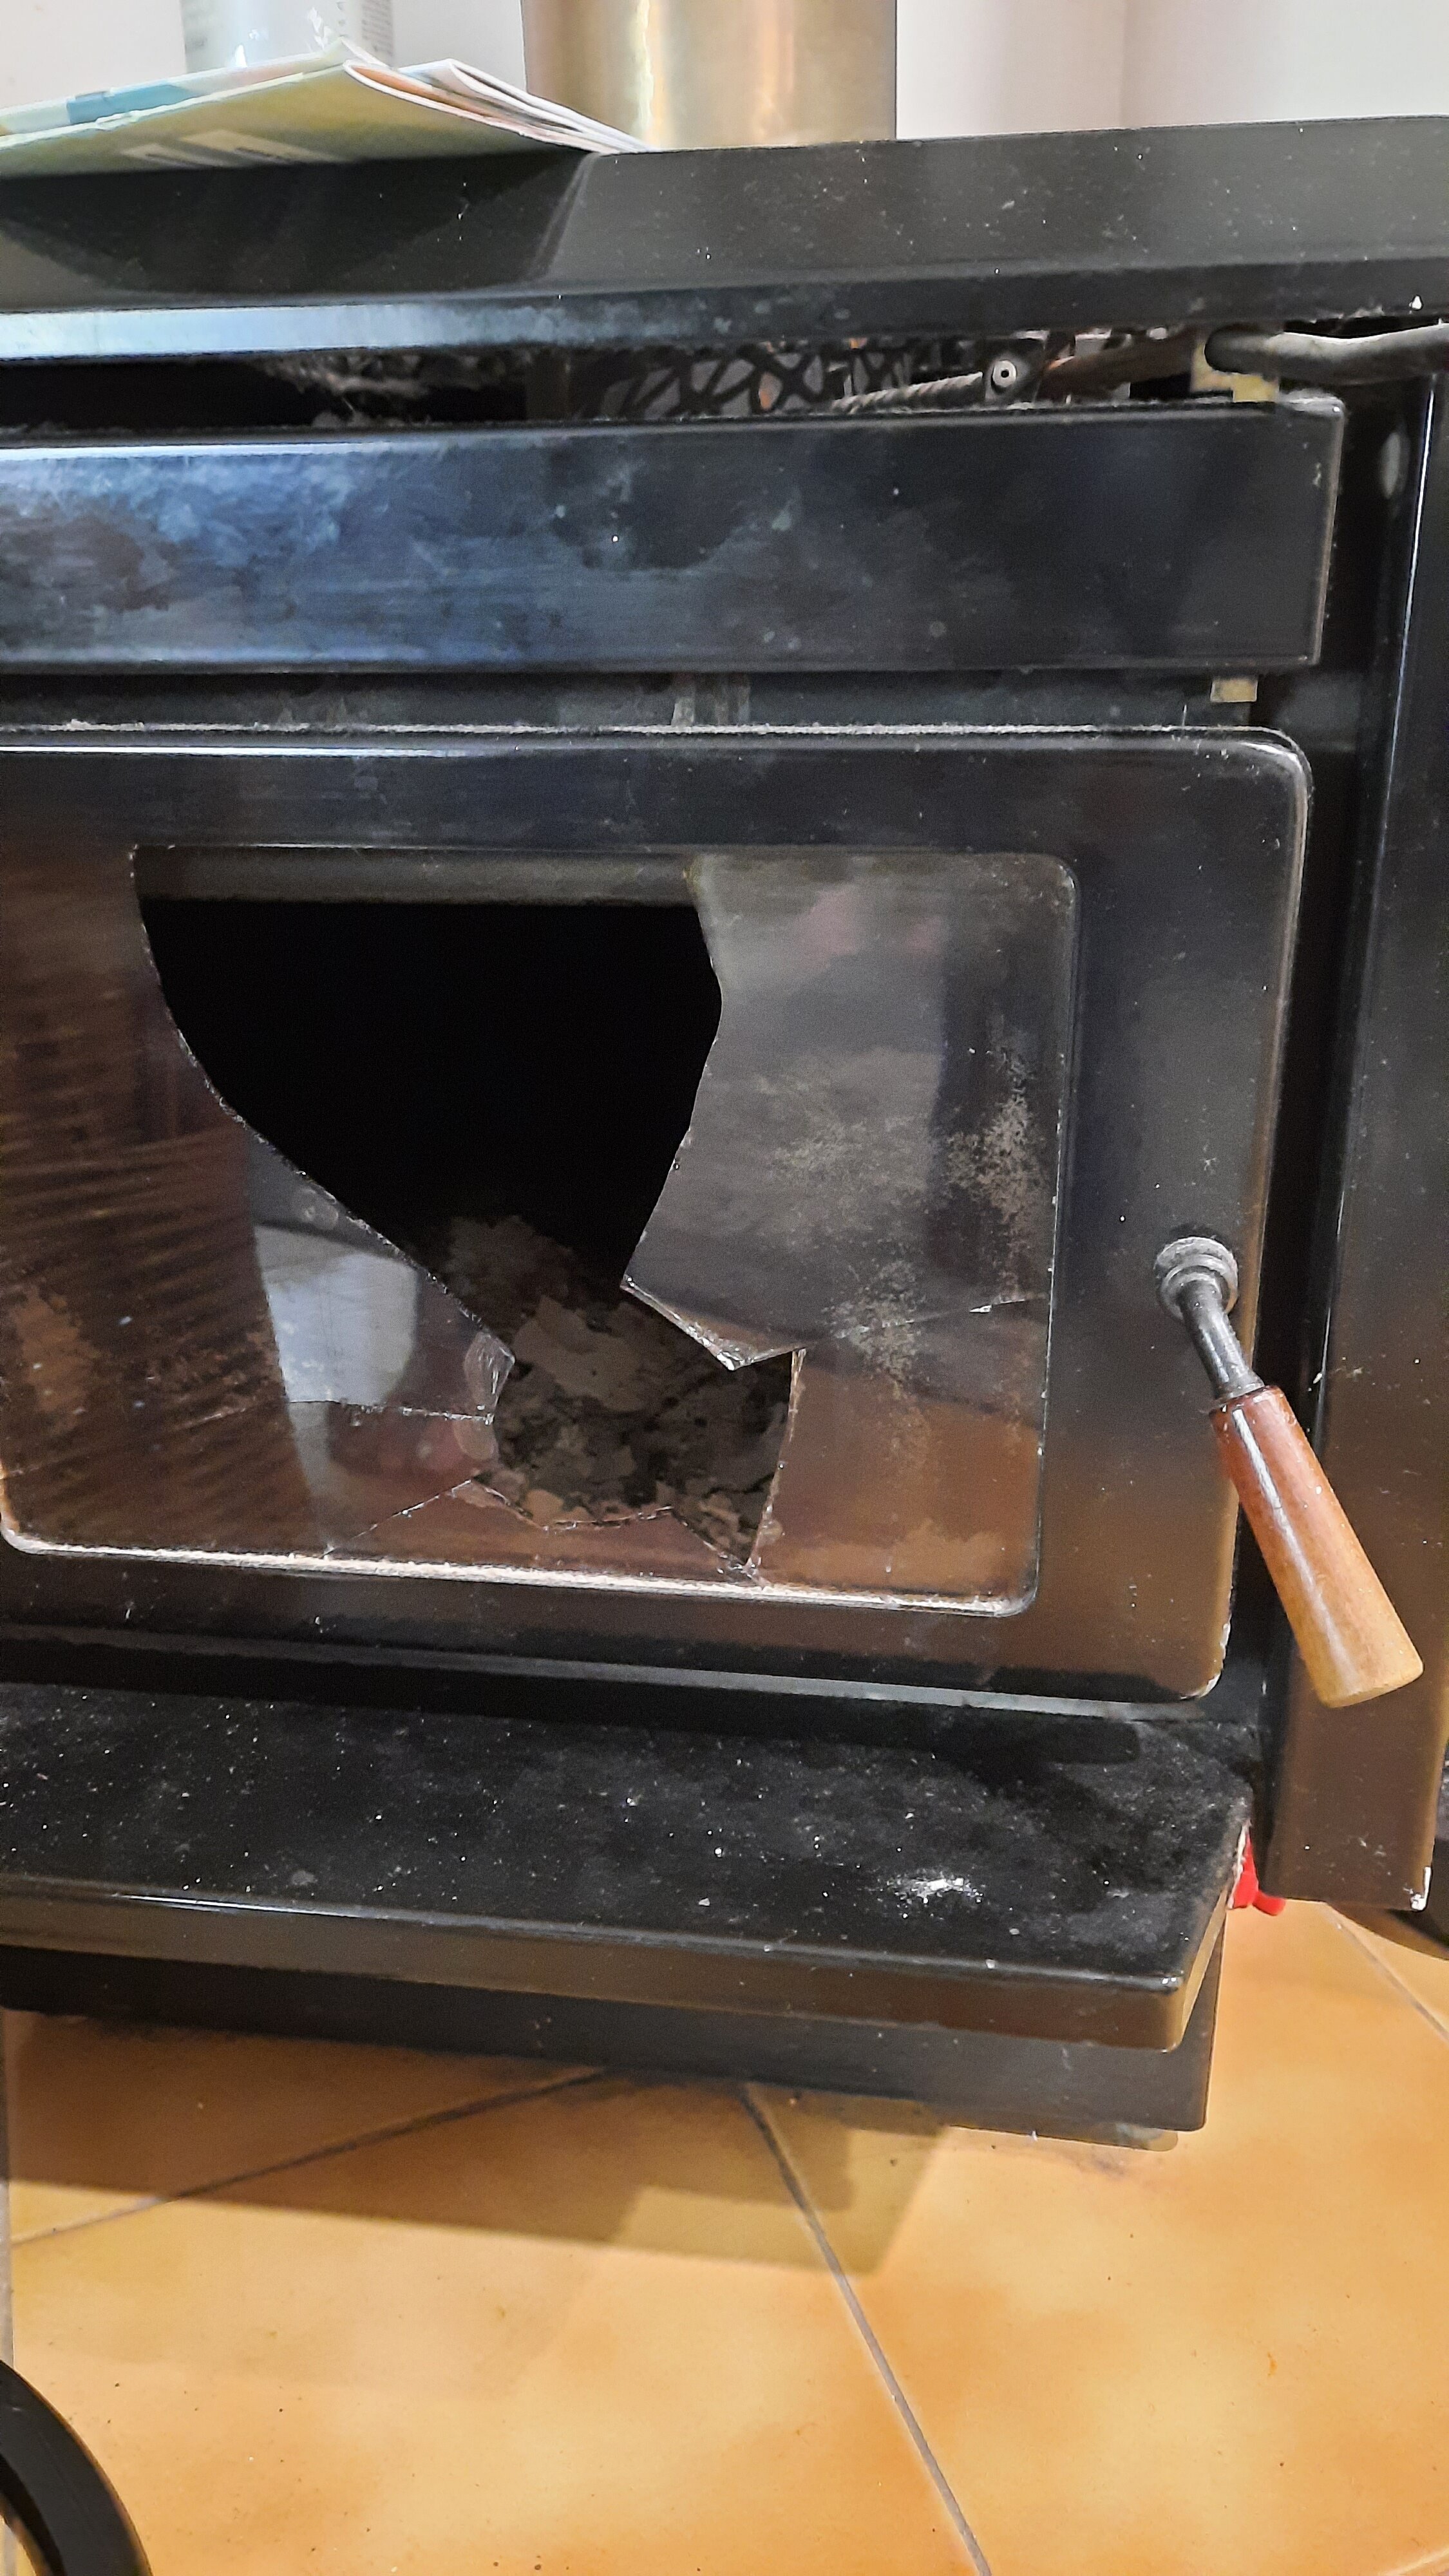 Need some advice about replacing the The glass door on my kent tile fire.  I accidentally smashed it while doing some work. How can I get it replaced?